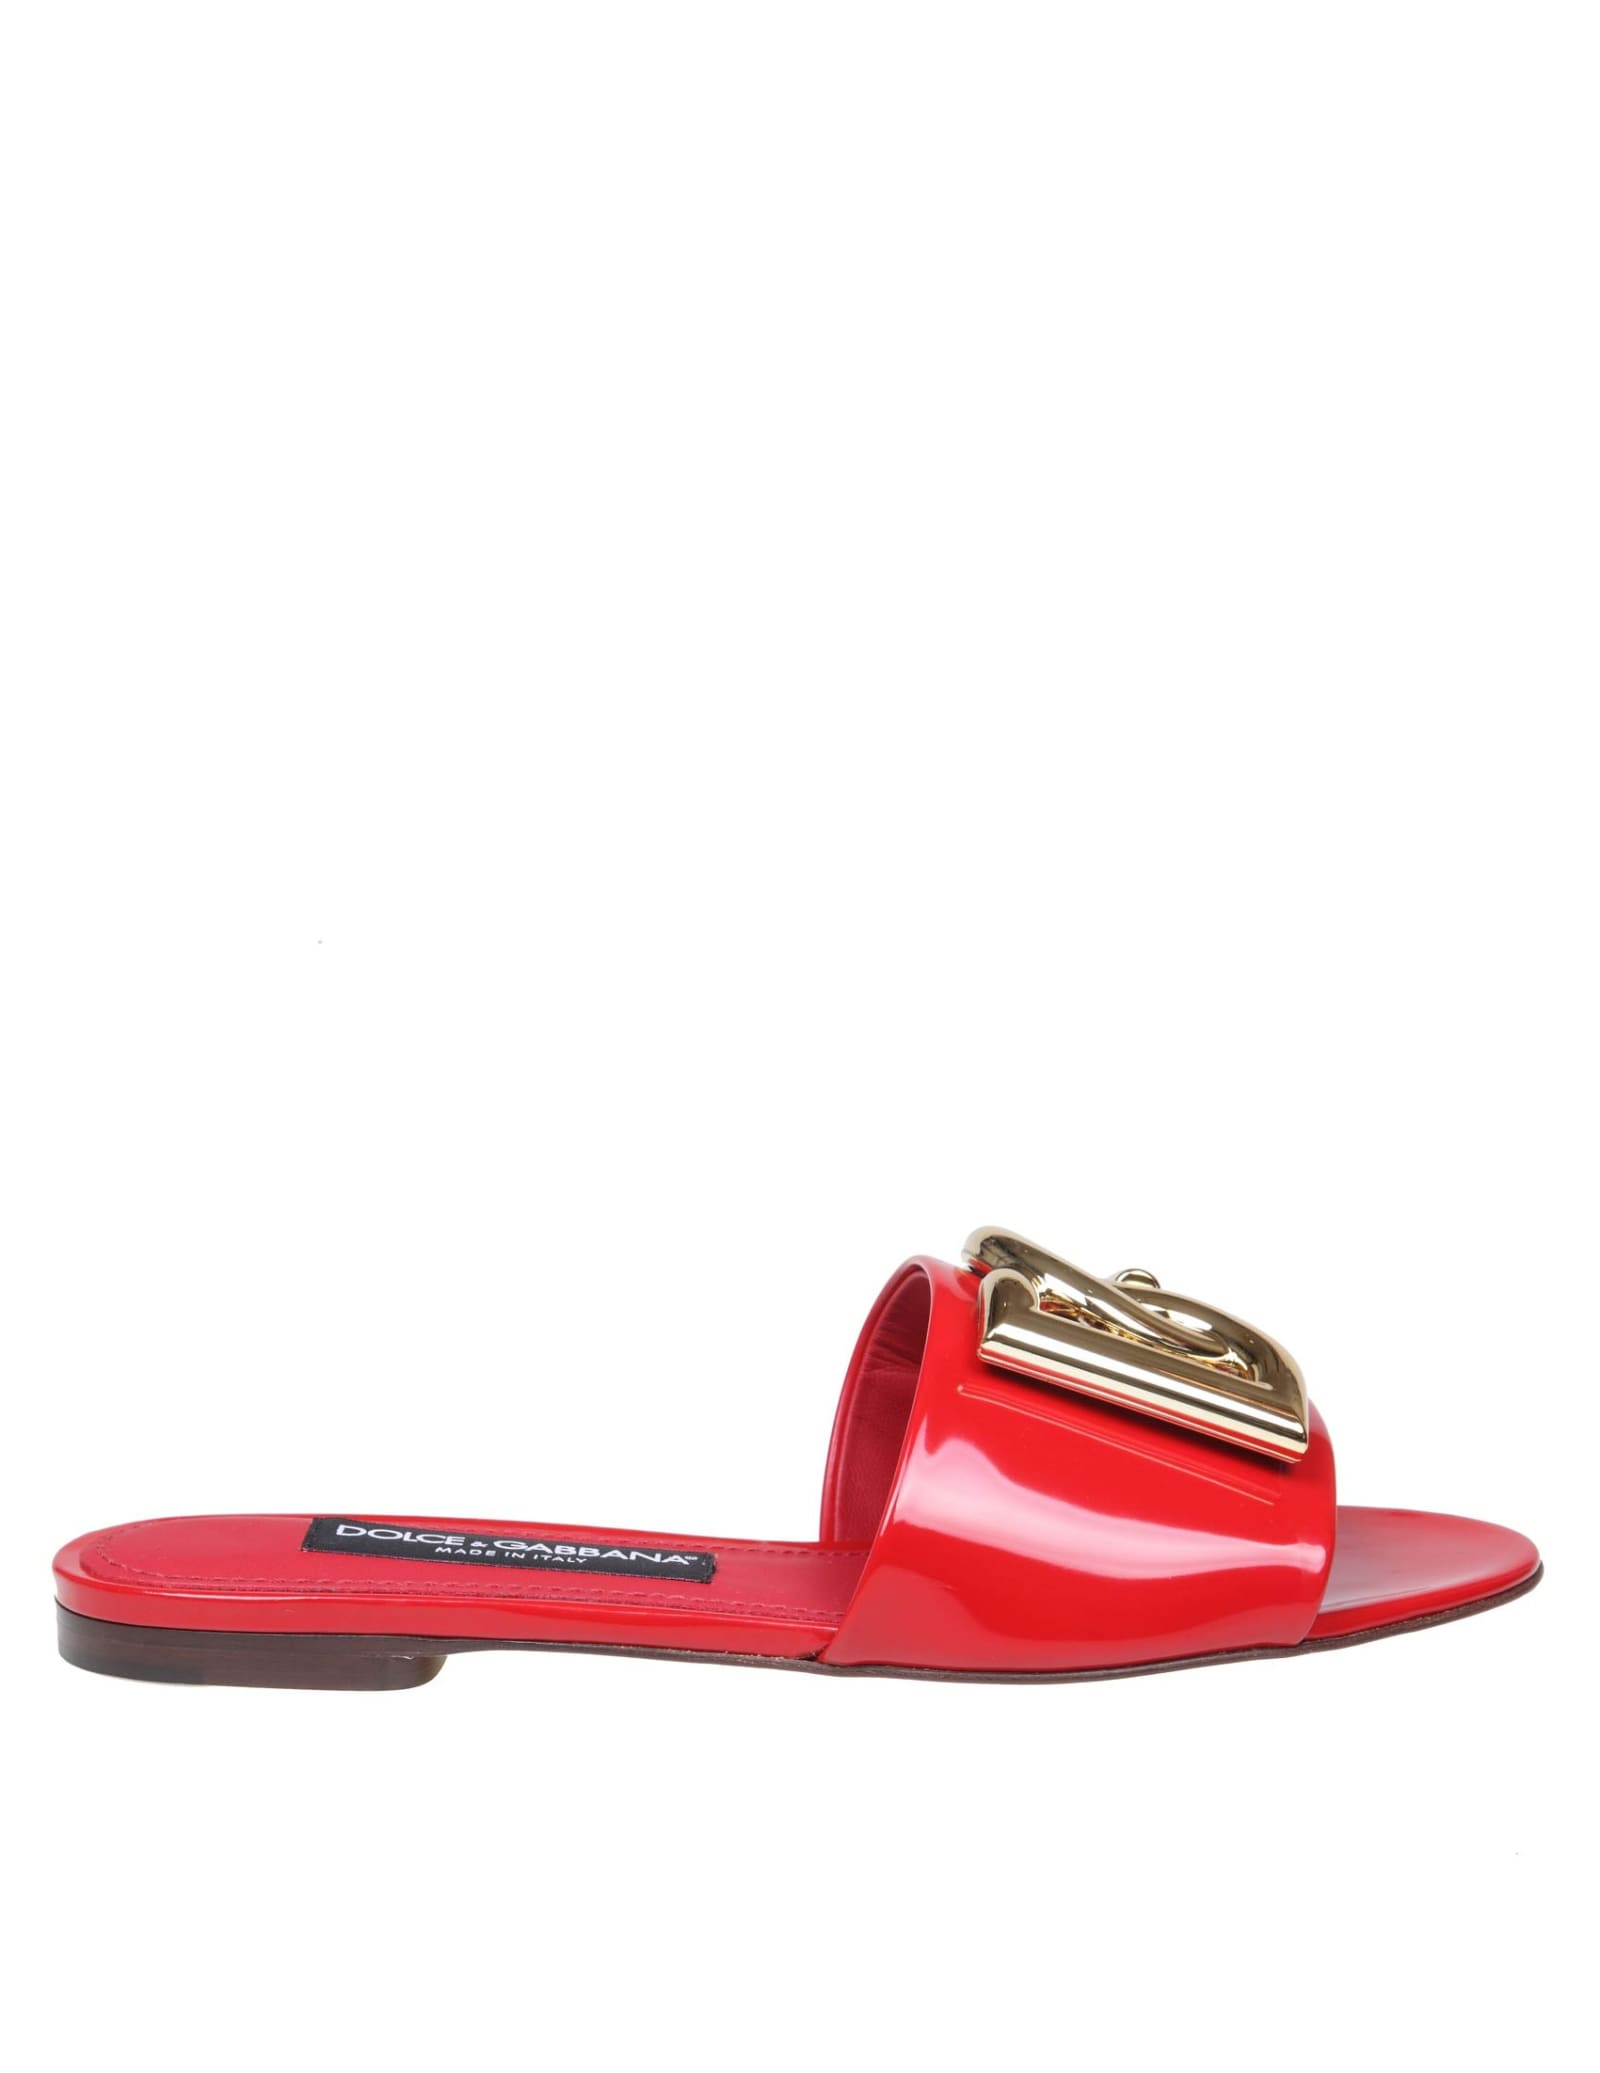 DOLCE & GABBANA SLIDE IN PATENT LEATHER WITH LOGO